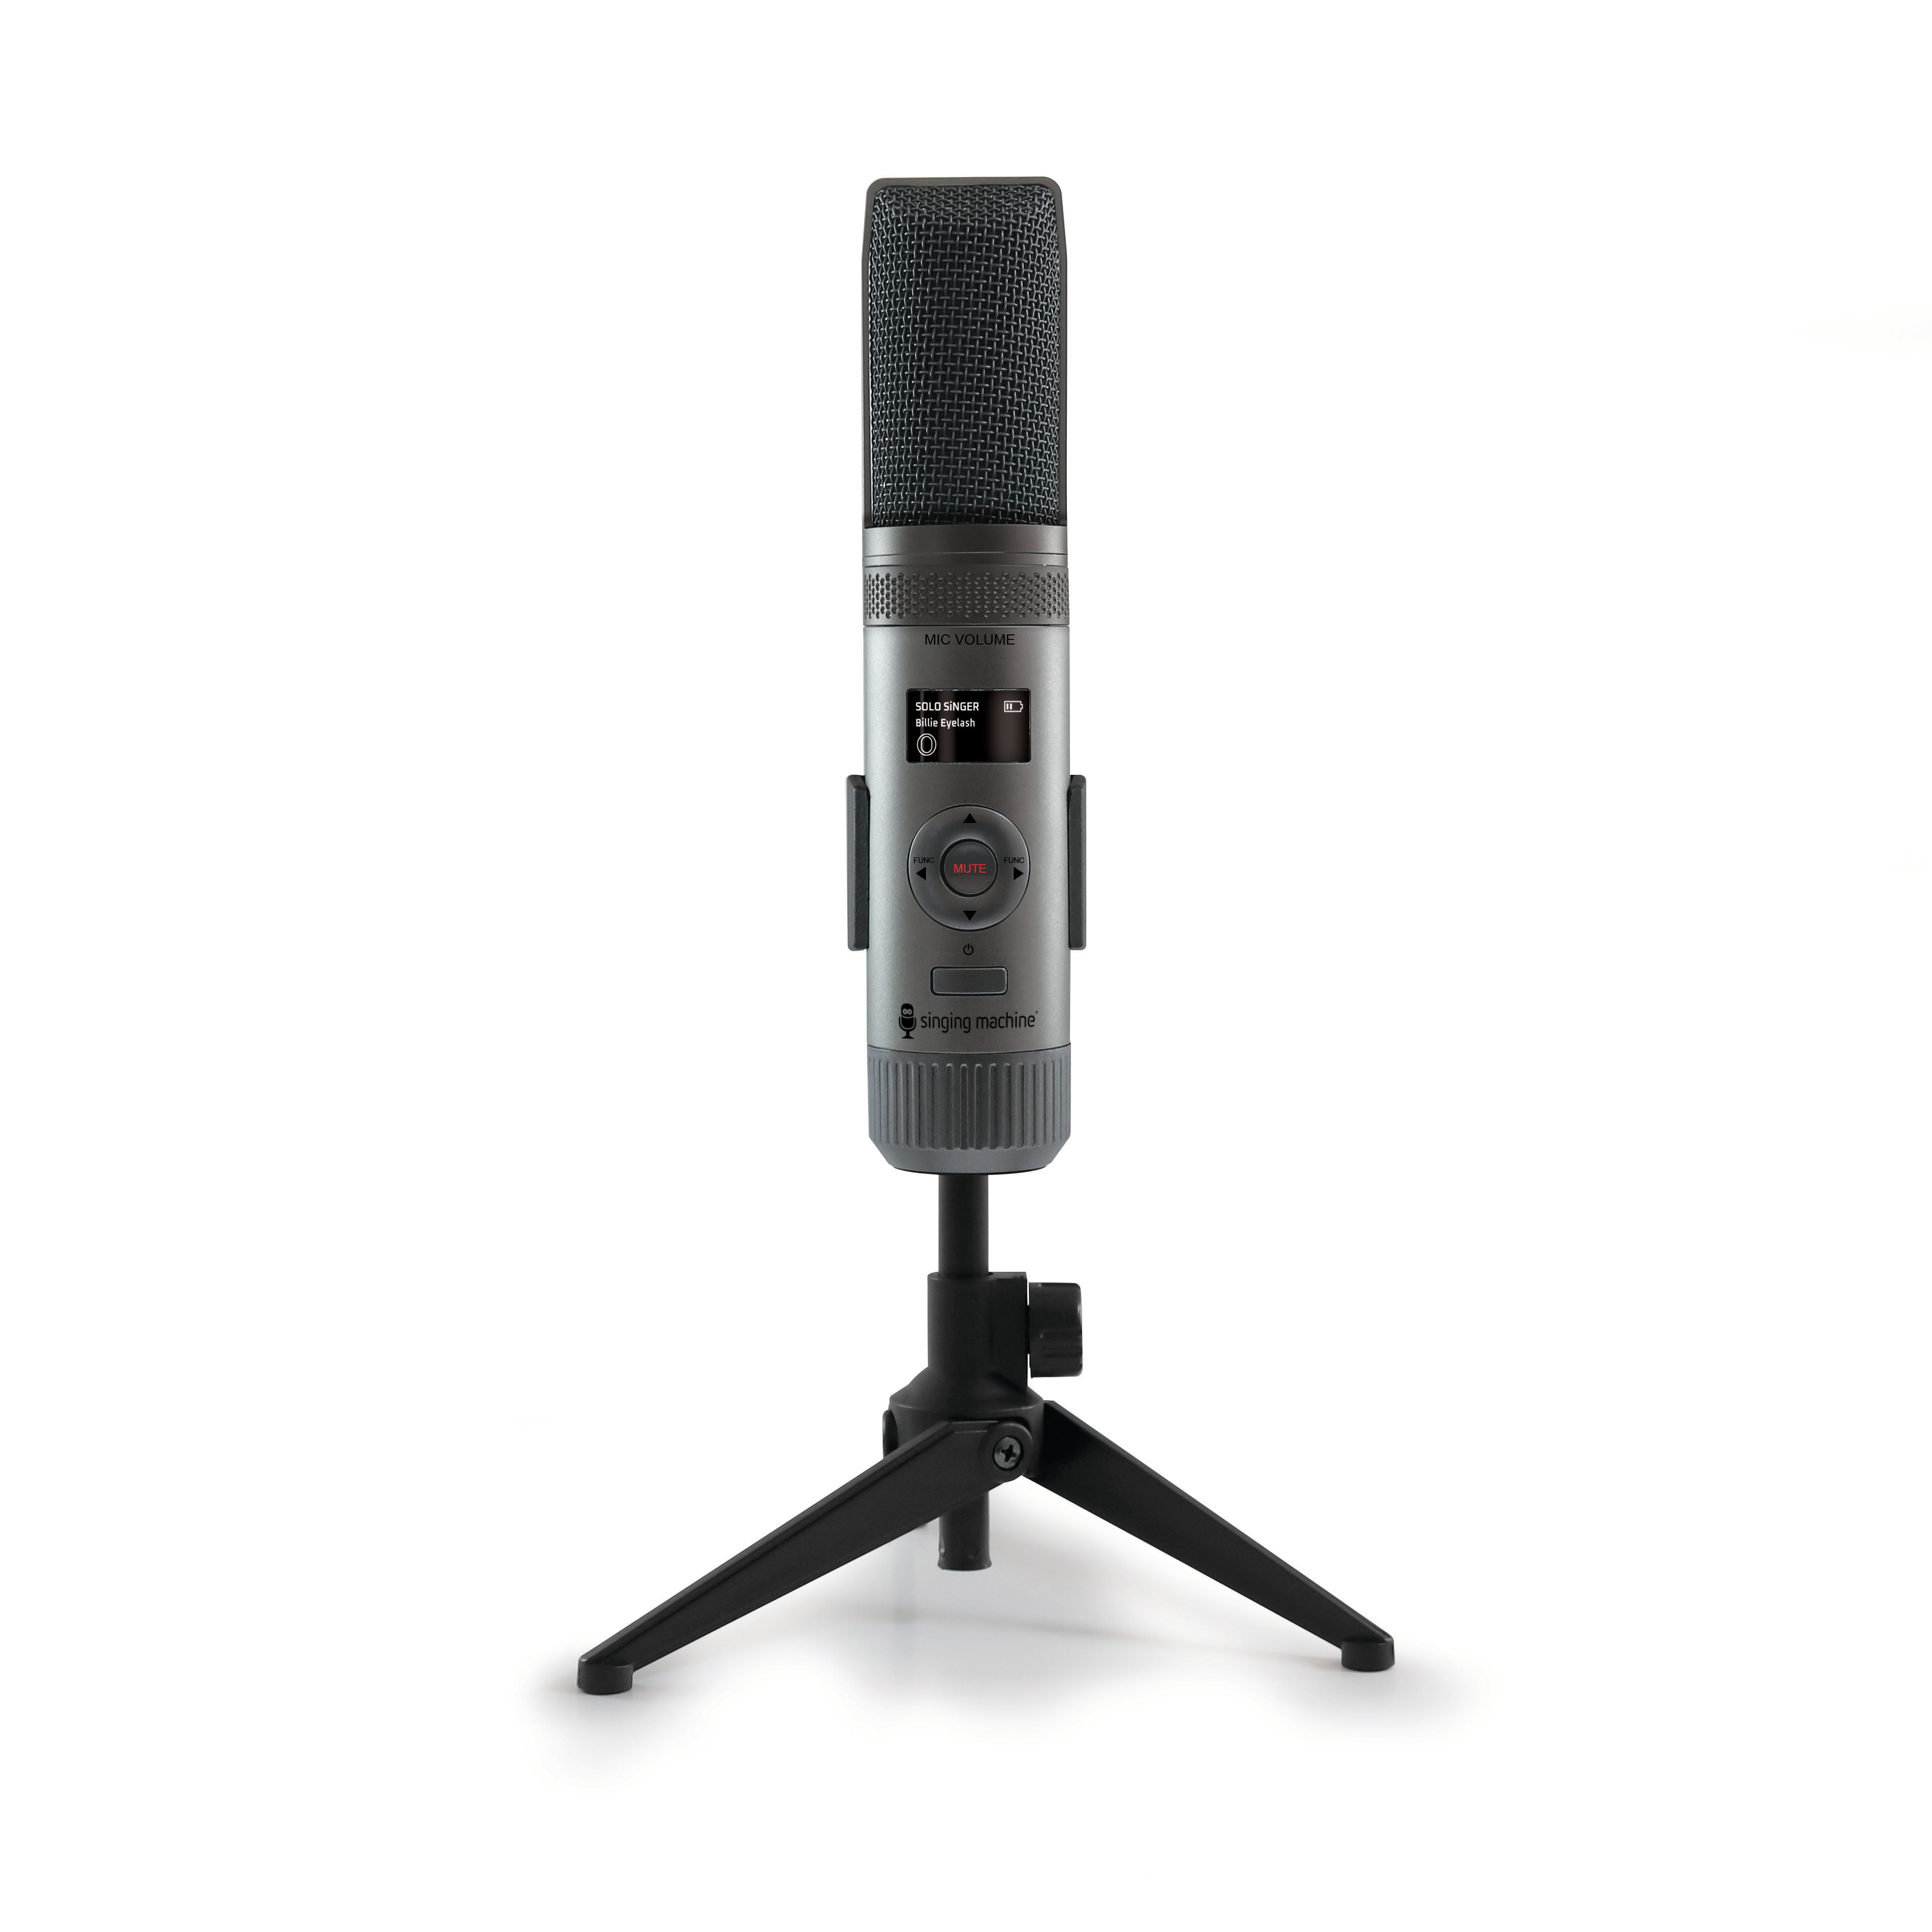 The Singing Machine All-In-One Microphone, Black, SMM2097